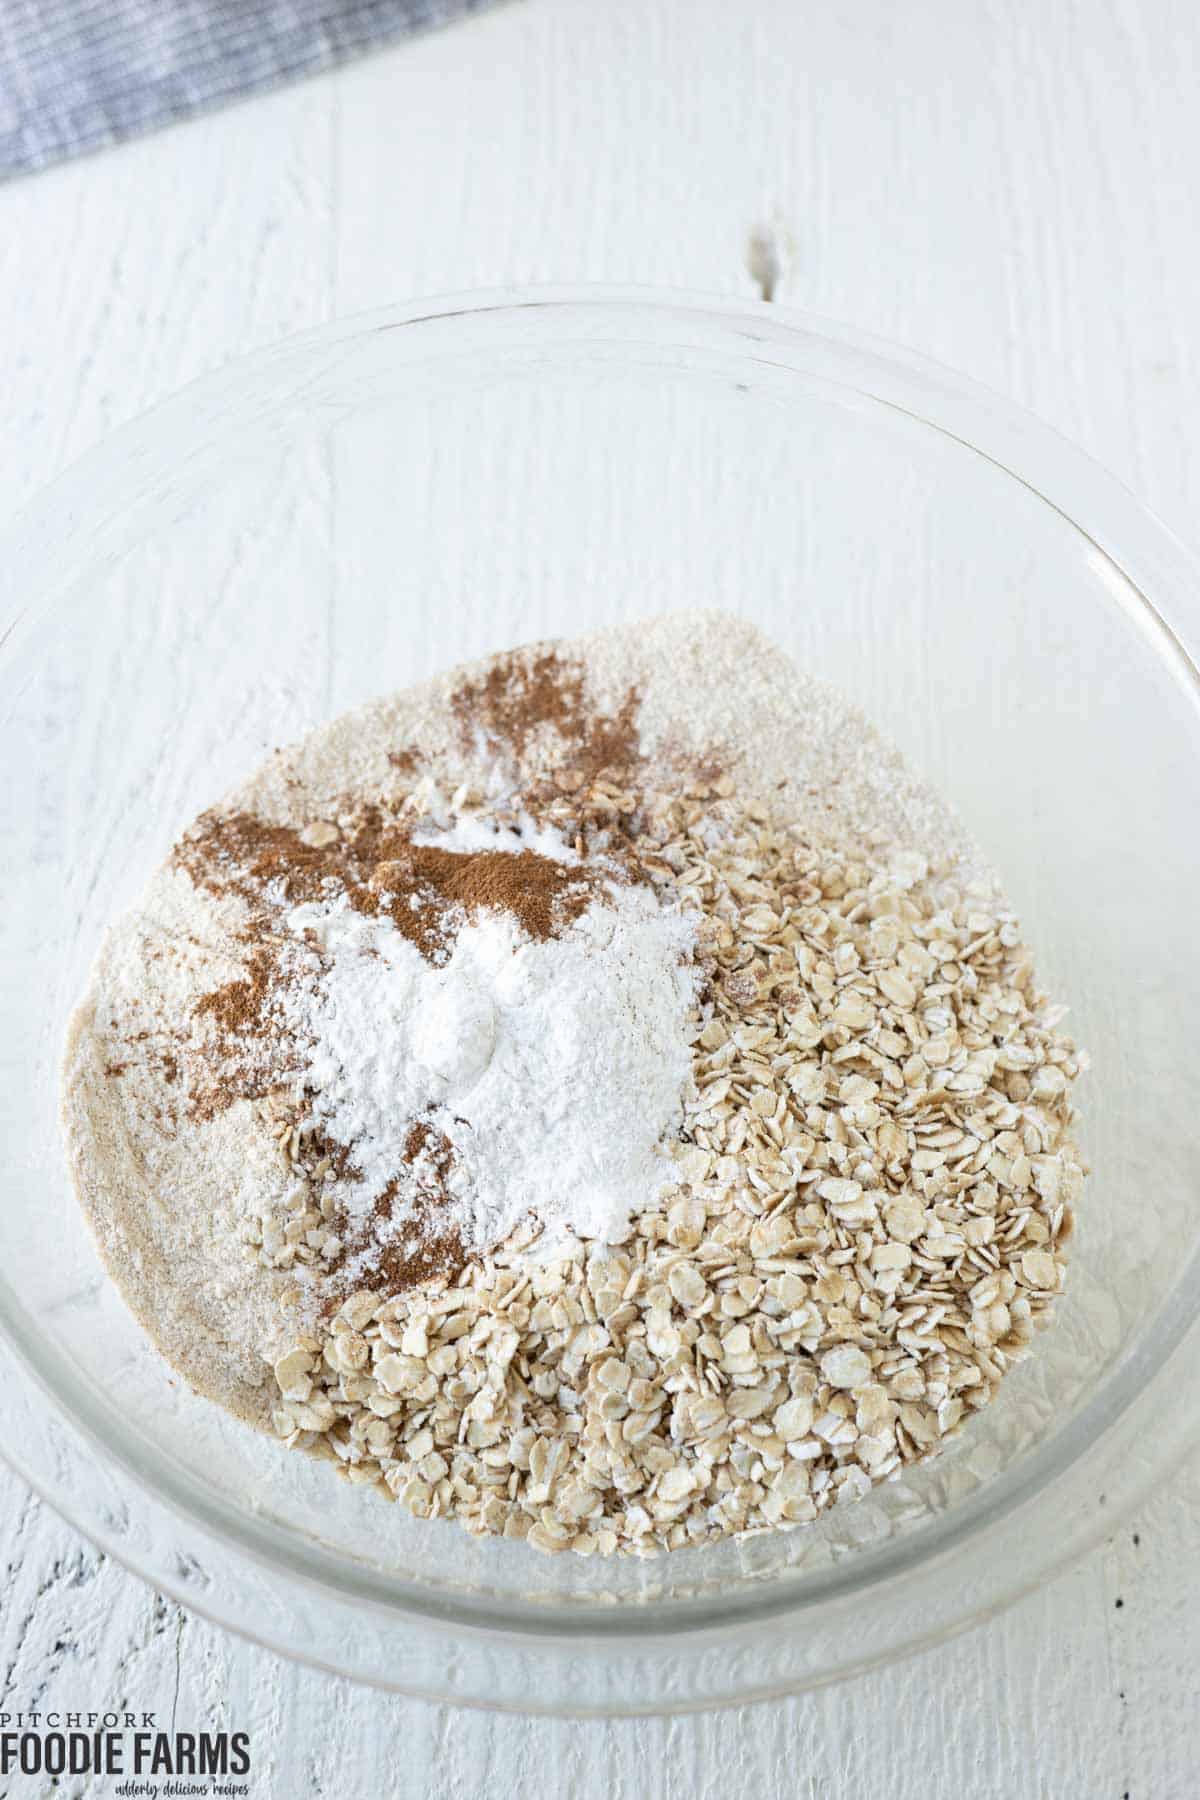 Oats and other dry ingredients needed to make banana muffins.